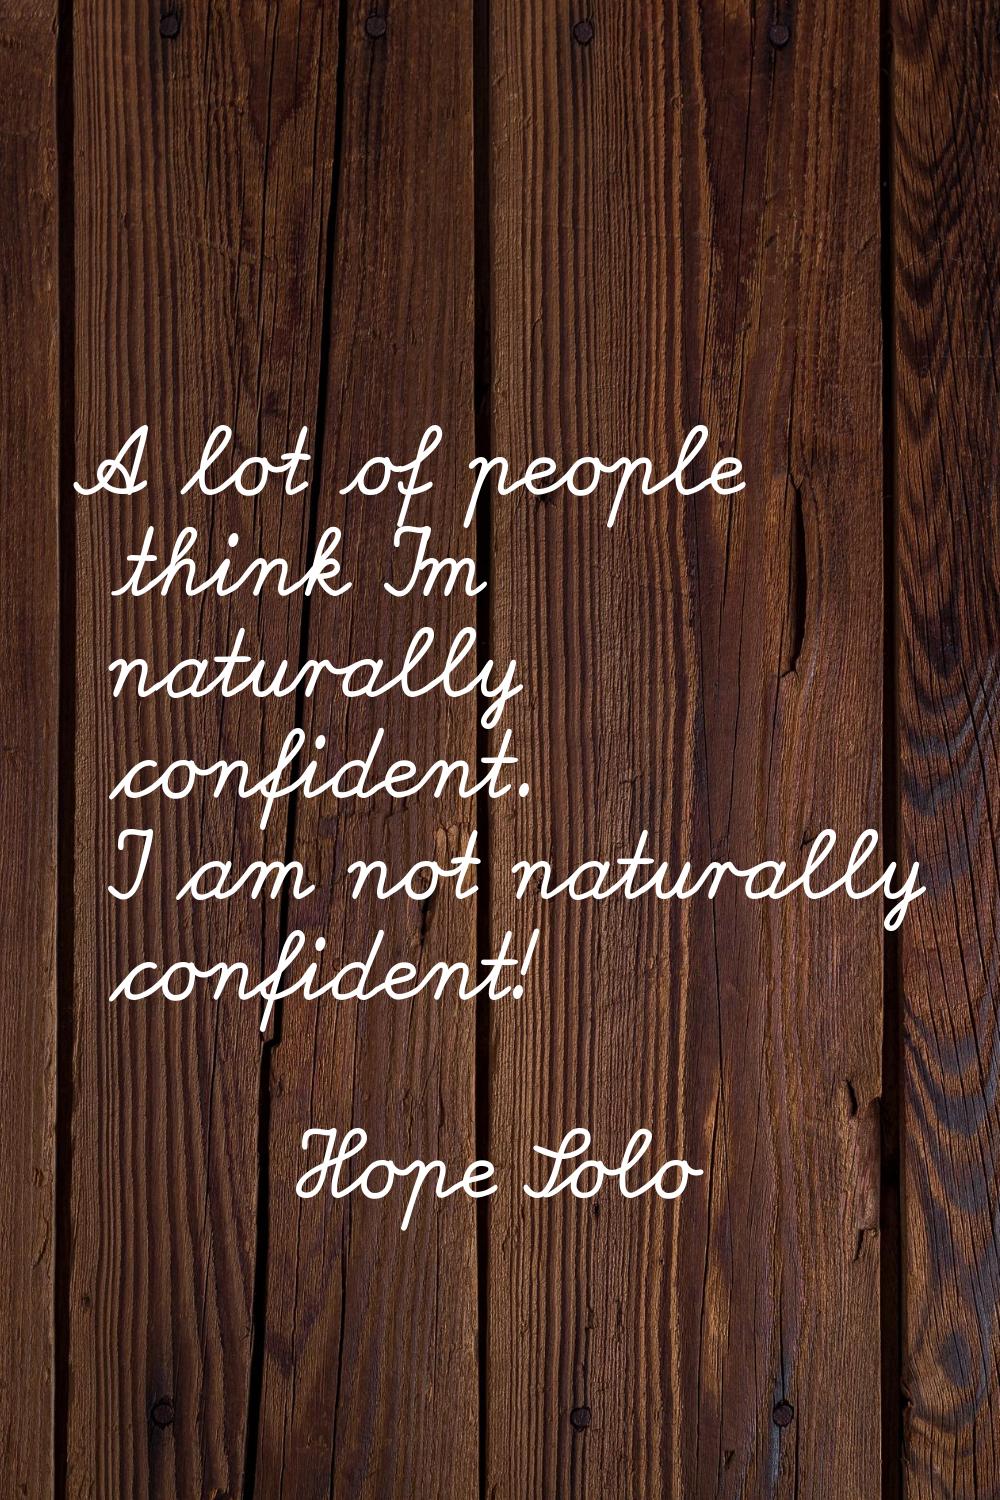 A lot of people think I'm naturally confident. I am not naturally confident!